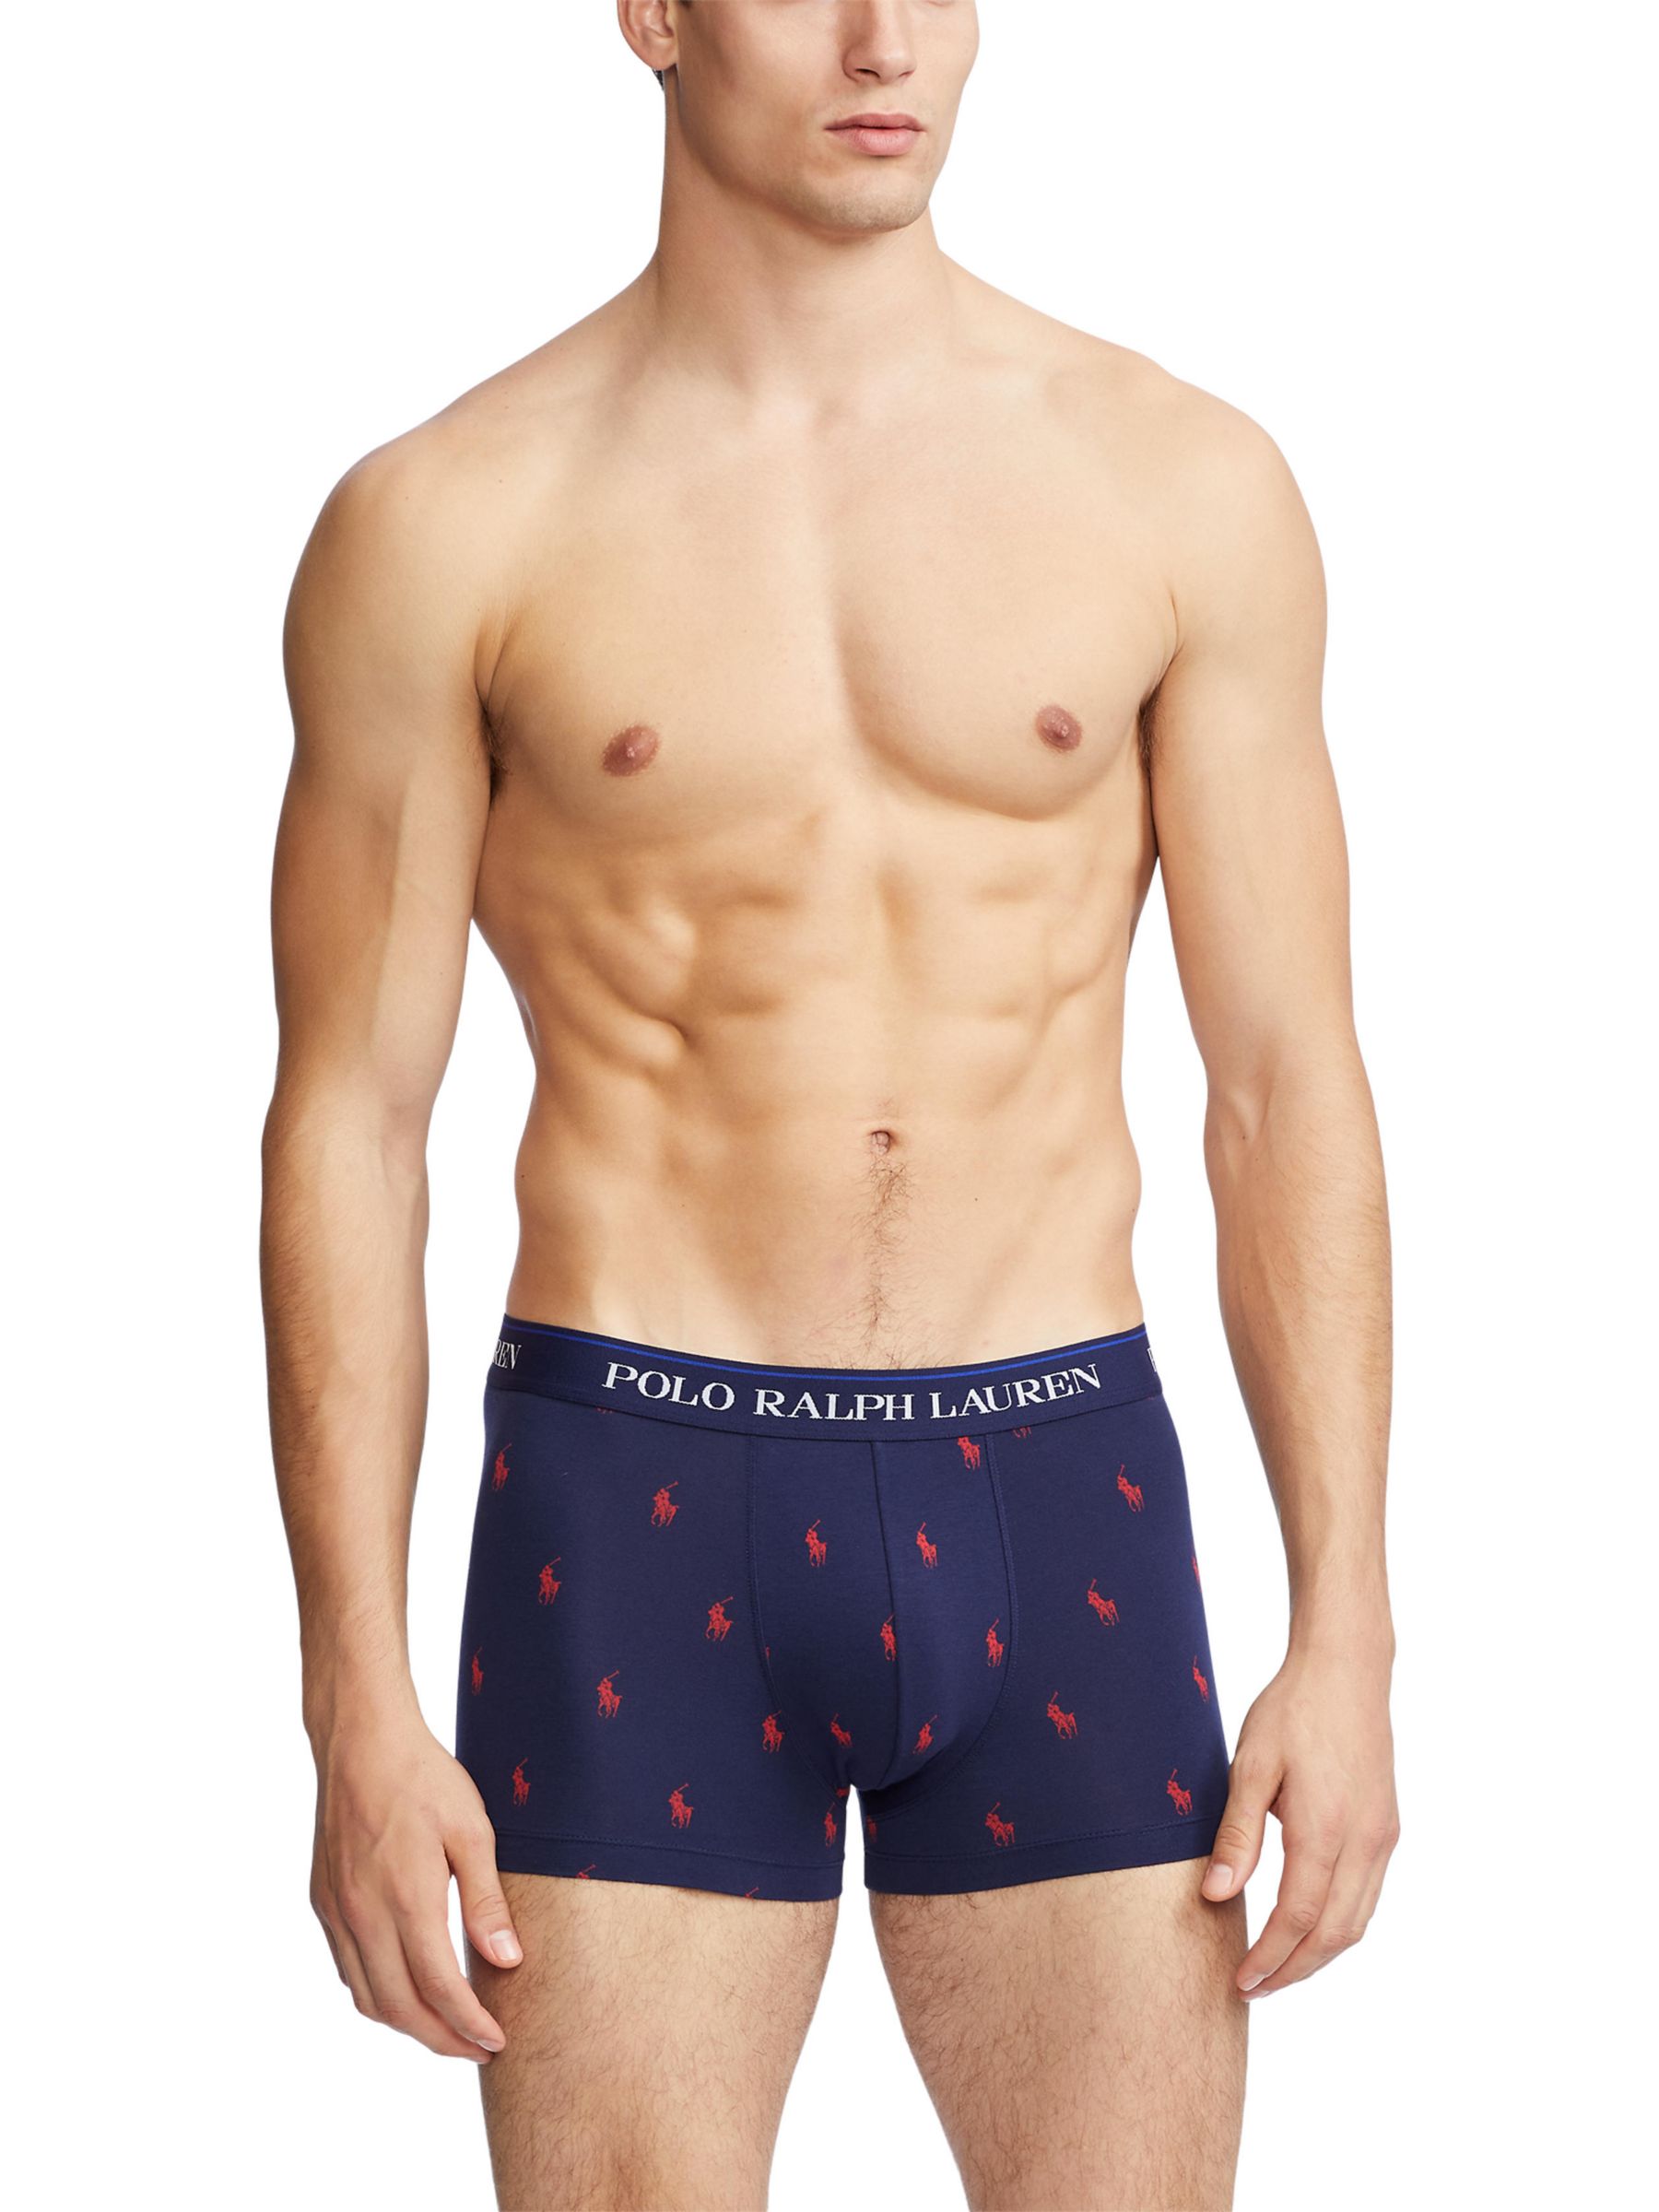 Polo Ralph Lauren Cotton Stretch Trunks, Pack of 3, Blue/Red Multi, S